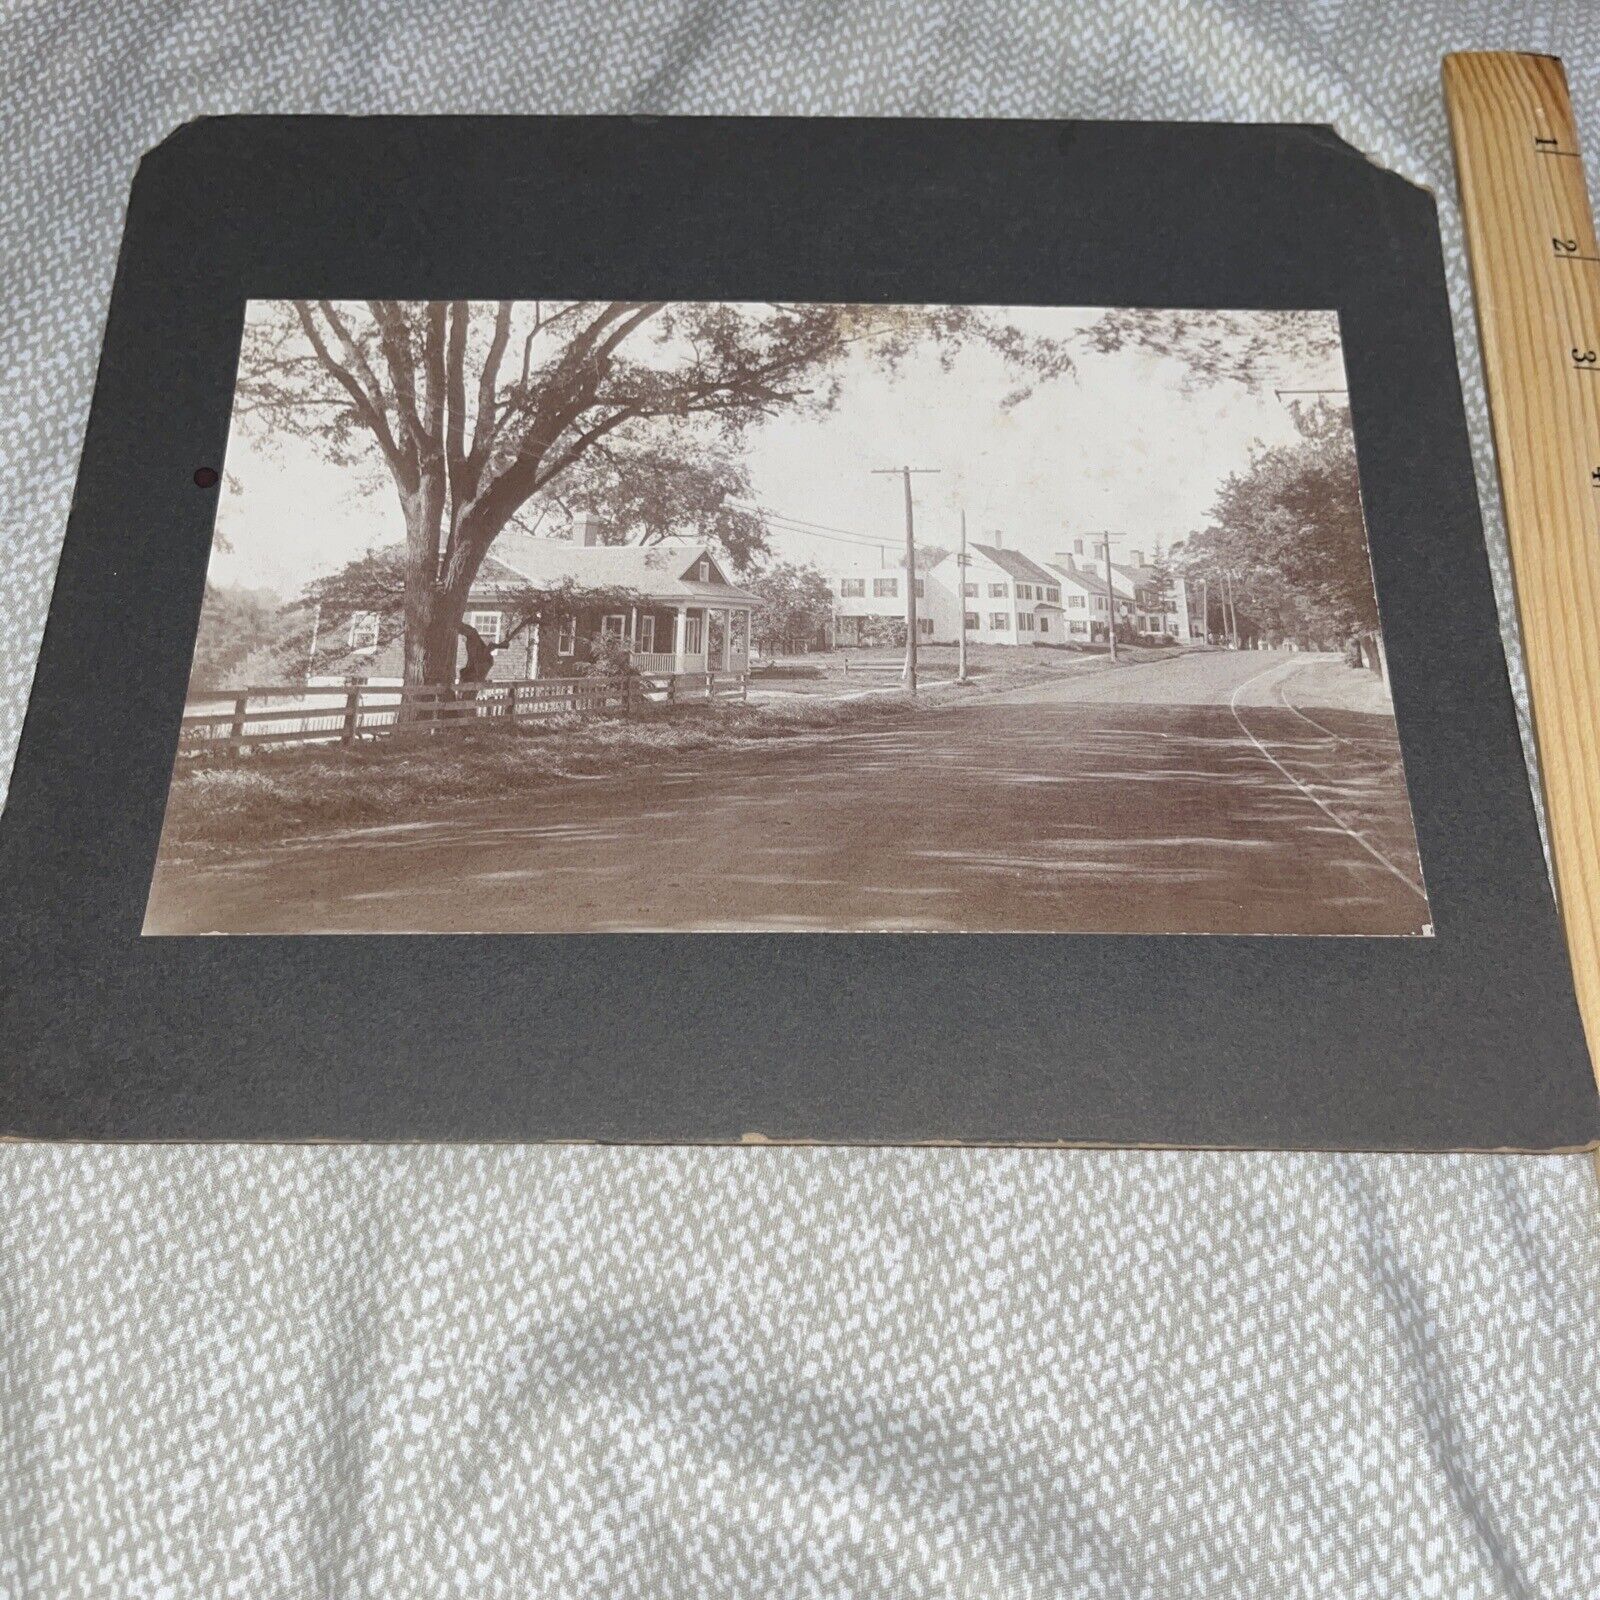 Large Antique Mounted Photo: Newbury MA Trolley Line Tracks - Maybe High St?